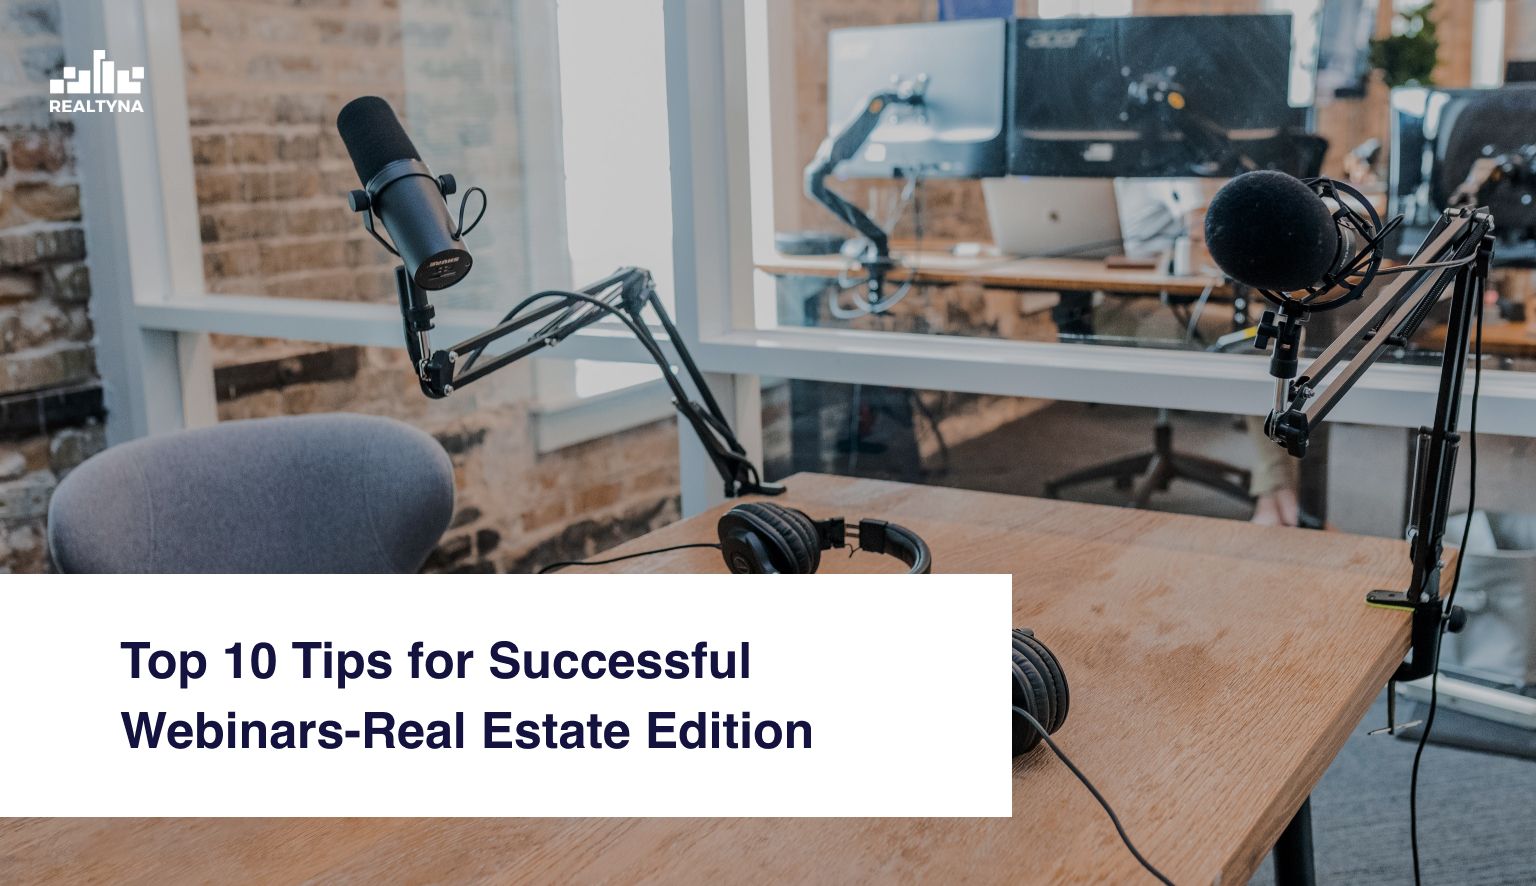 Top-10-Tips-for-Successful-Webinars-Real-Estate-Edition.jpeg